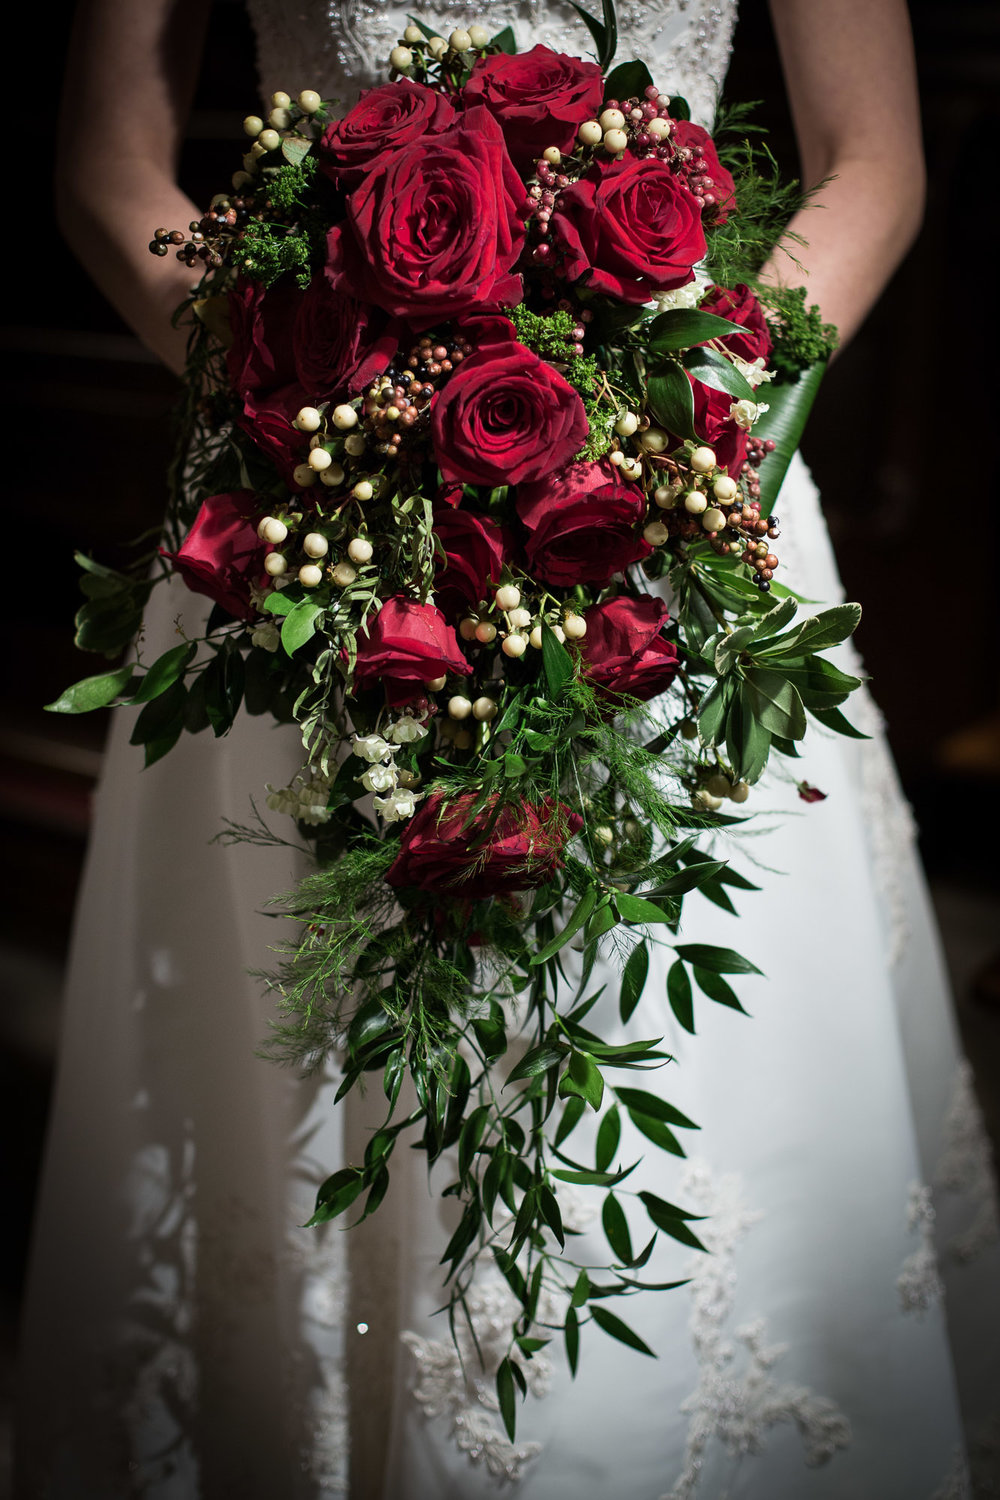 Cascading bouquet of red roses, white berries. The greenery is a mix of Israeli ruscus leaves and soft Asparagus Ferns